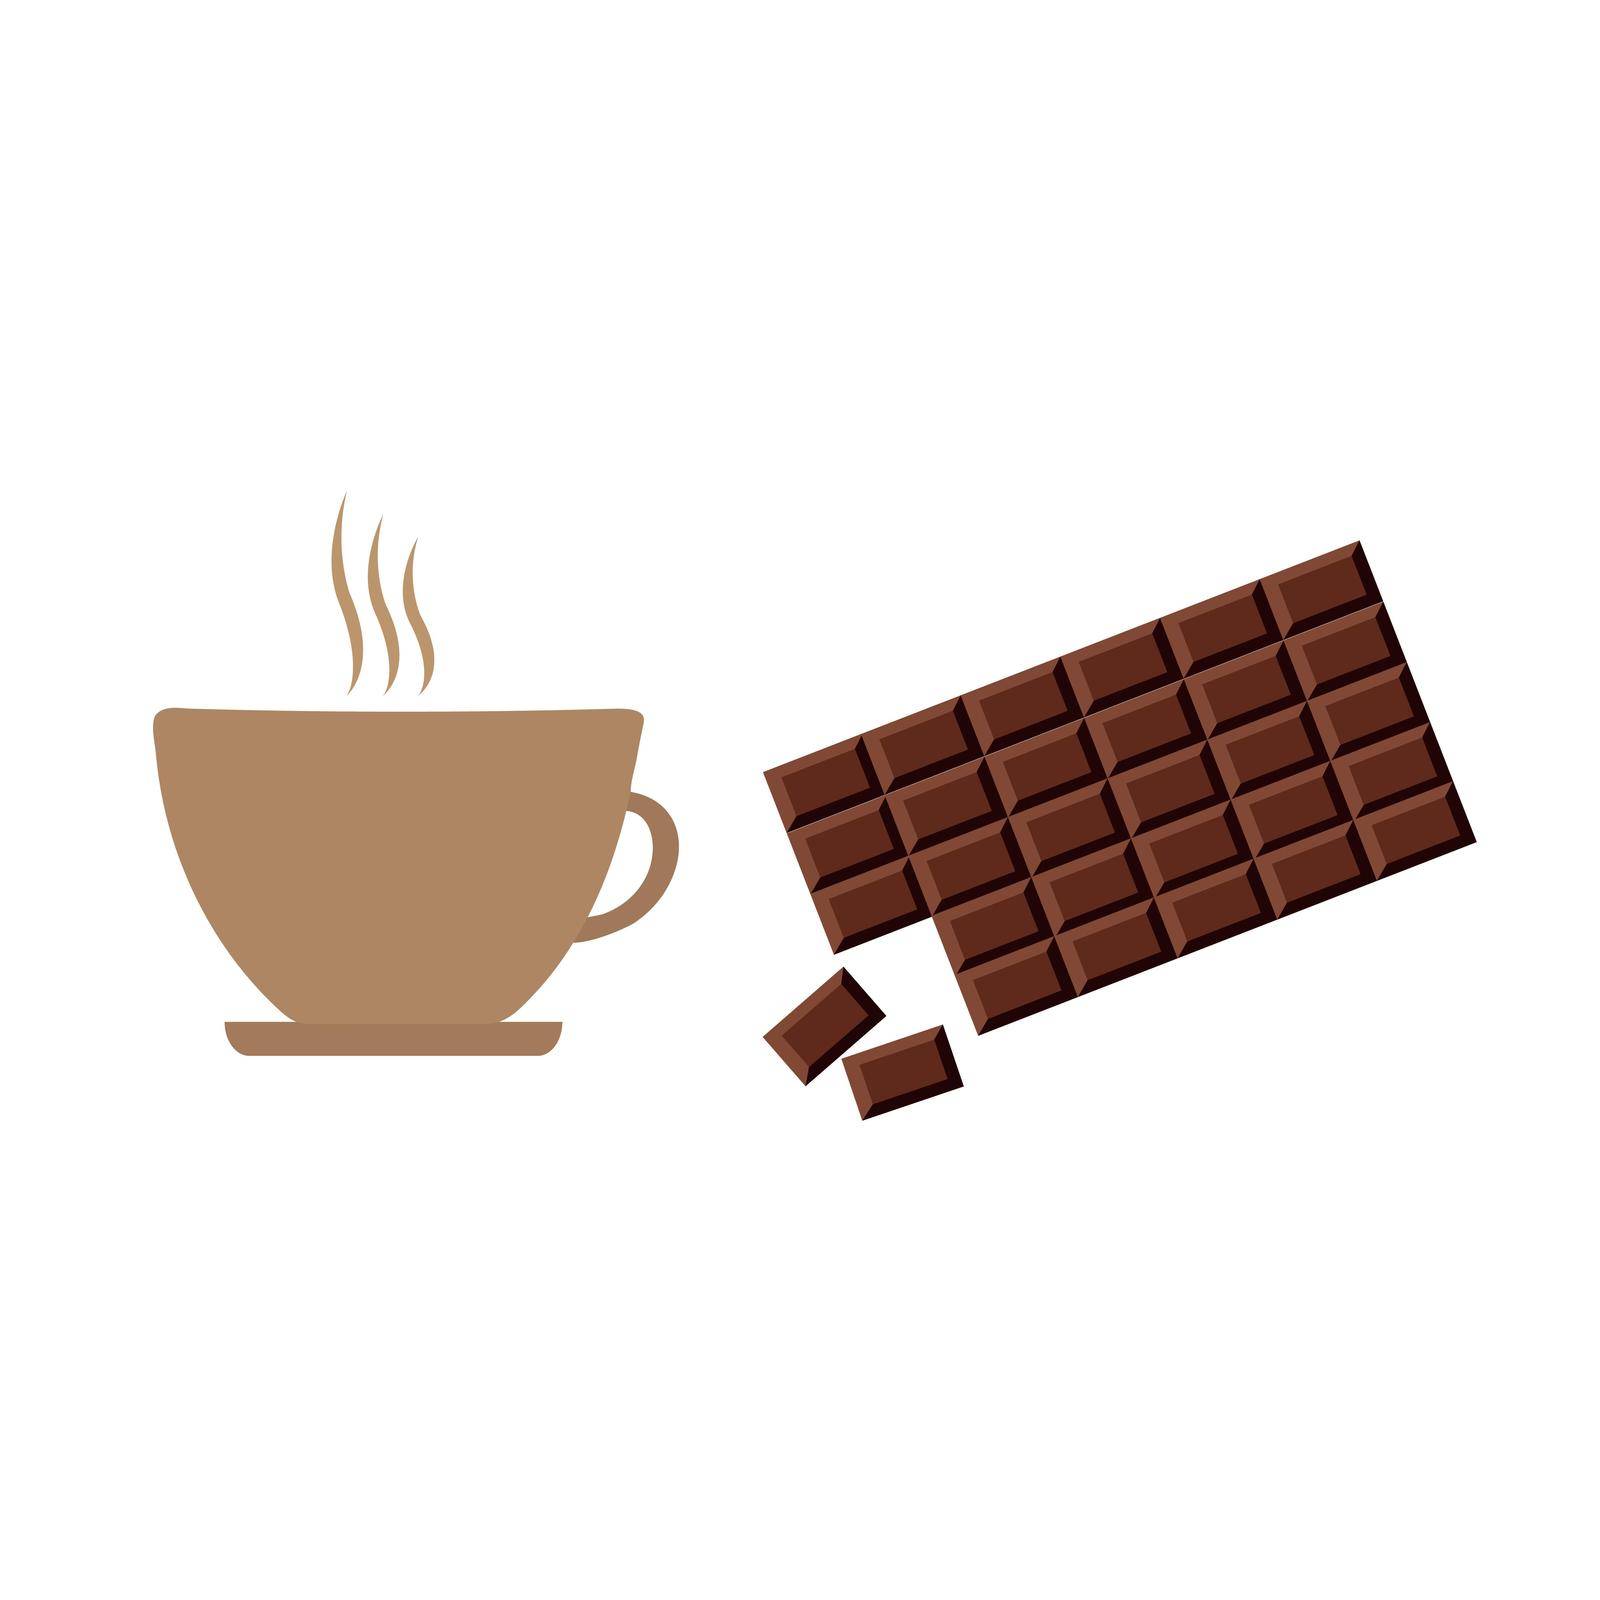 A cup of coffee and a bar of chocolate on a white background. Vector illustration in a flat style.